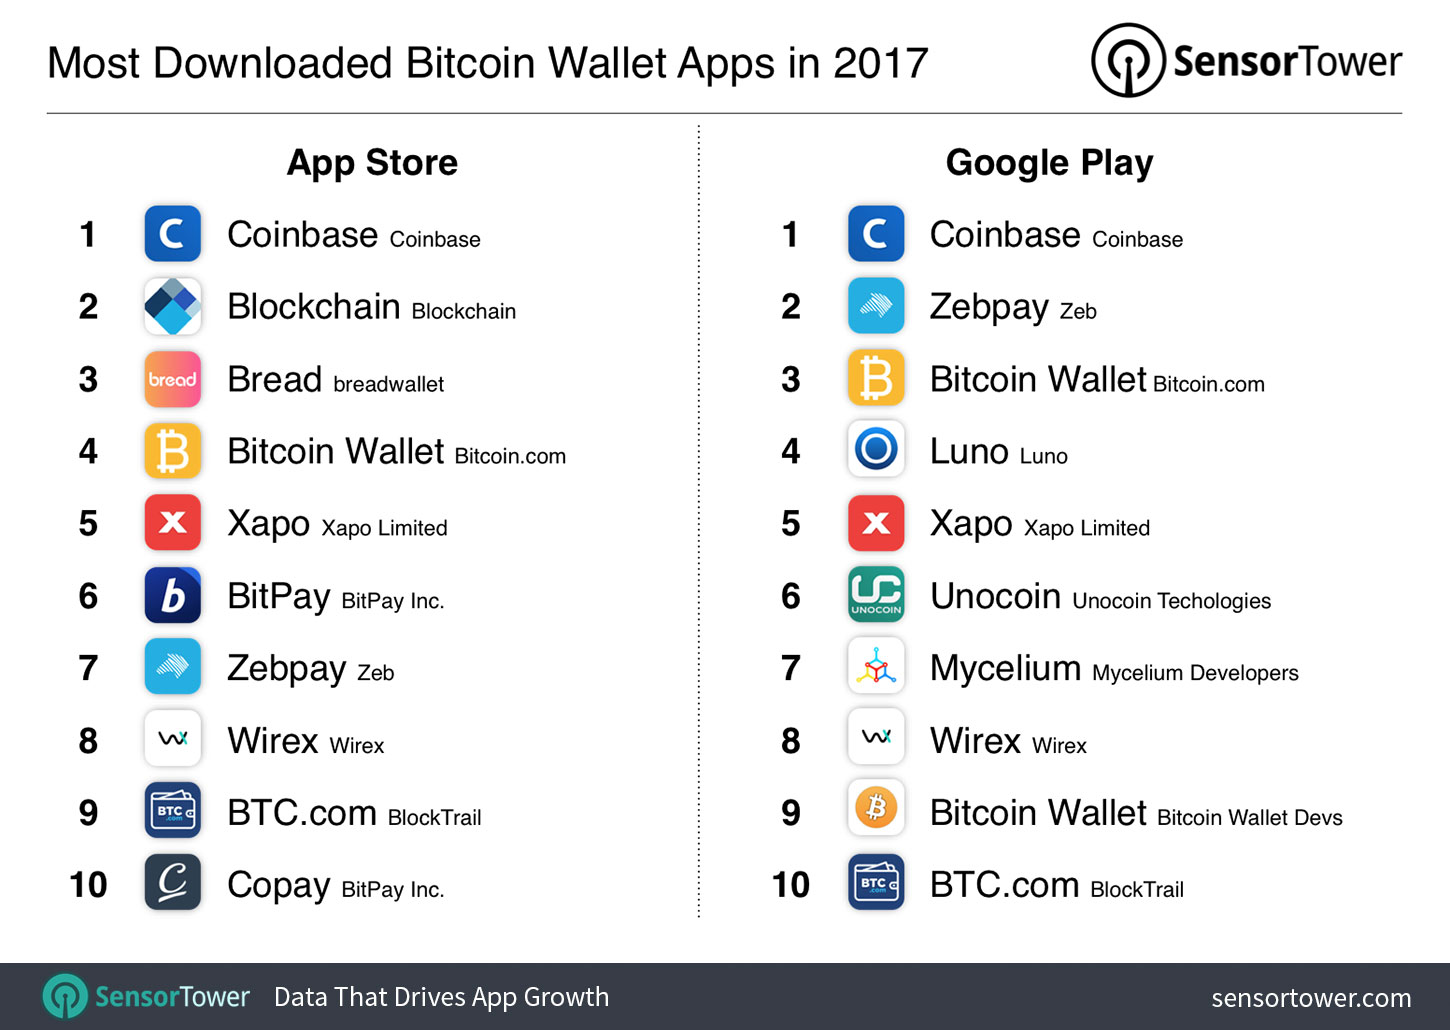 Top 10 bitcoin wallet apps by 2017 downloads to date